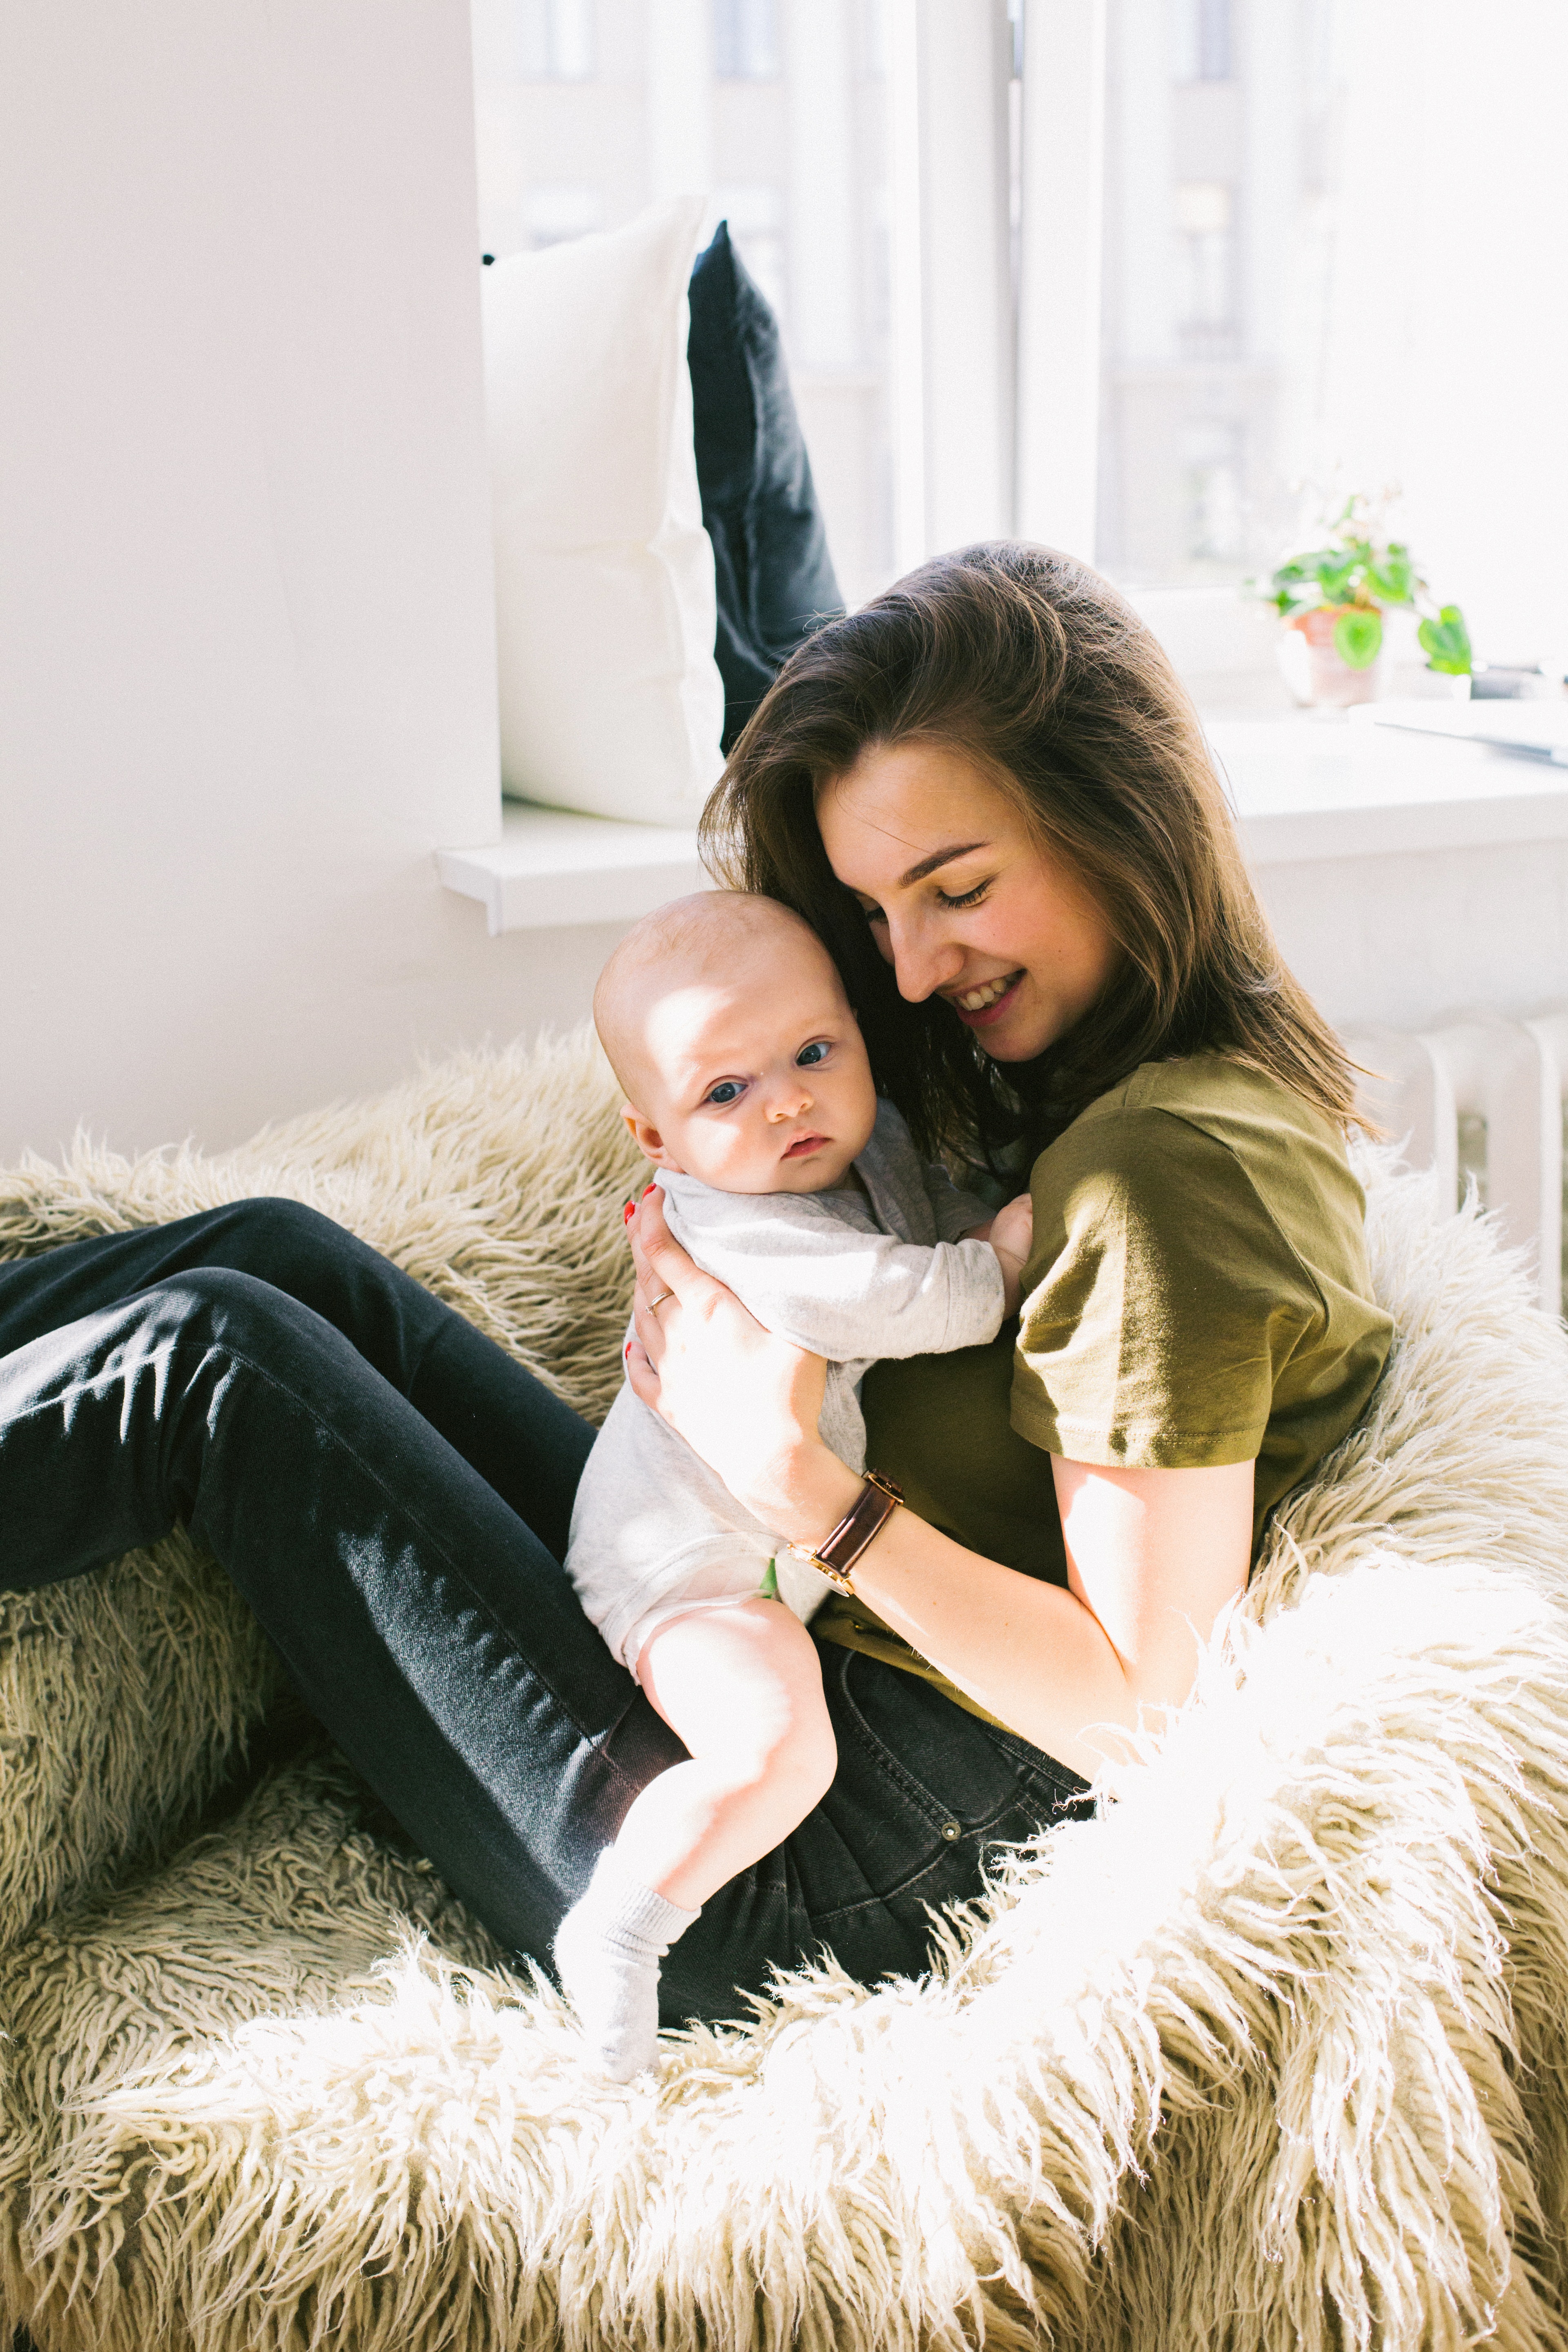 Woman in green shirt holding baby while sitting photo